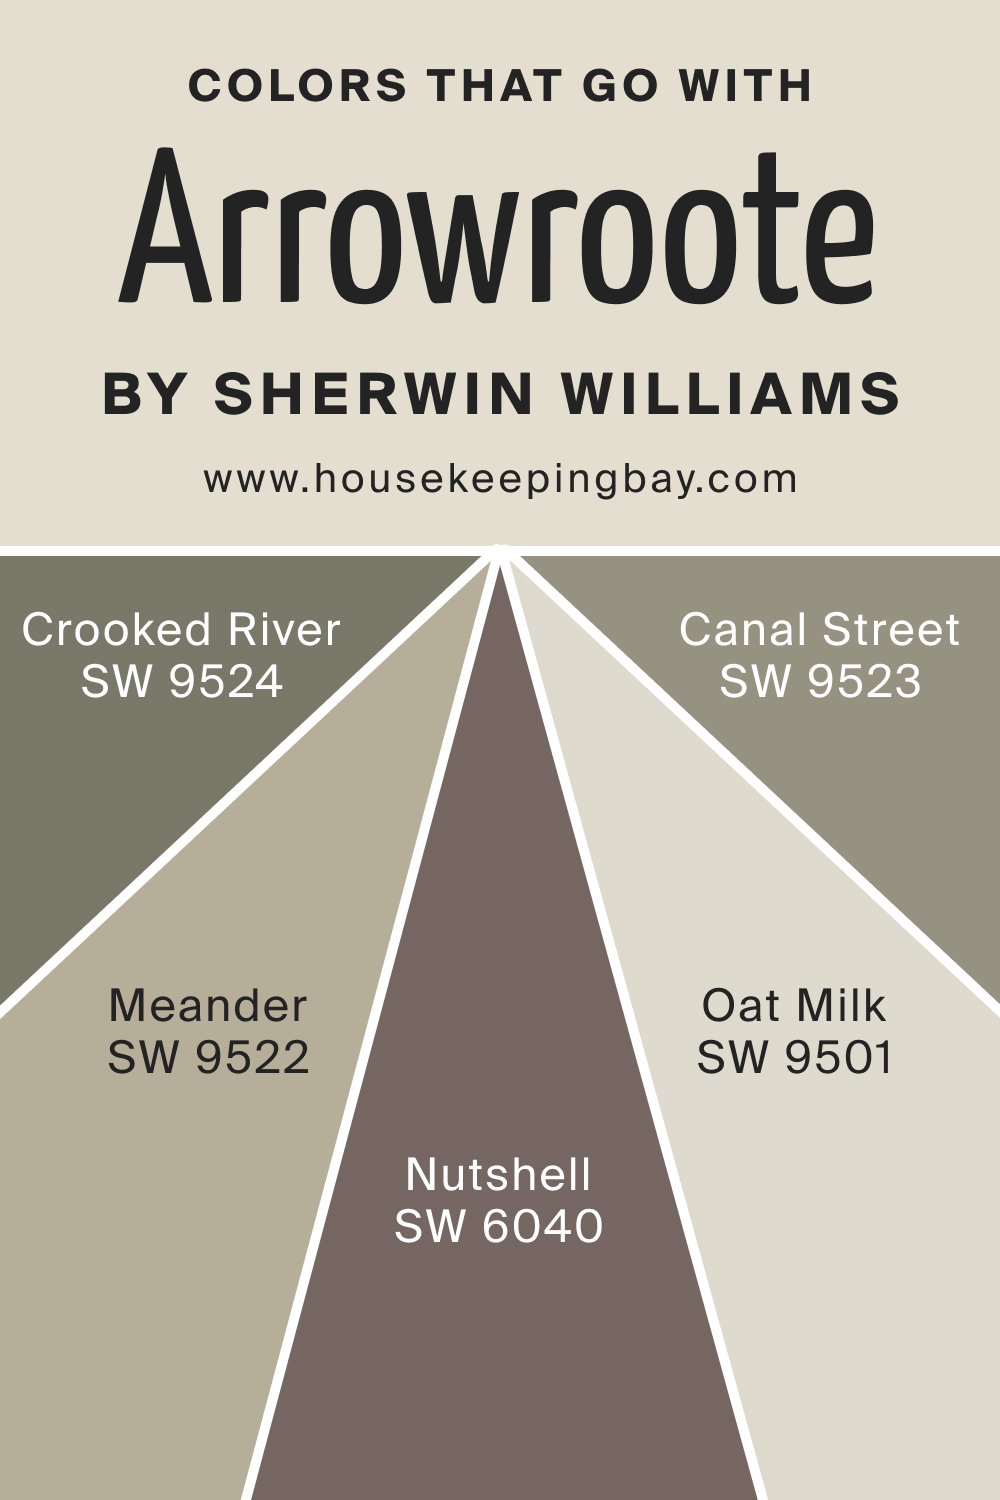 Colors that goes with SW 9502 Arrowroote by Sherwin Williams